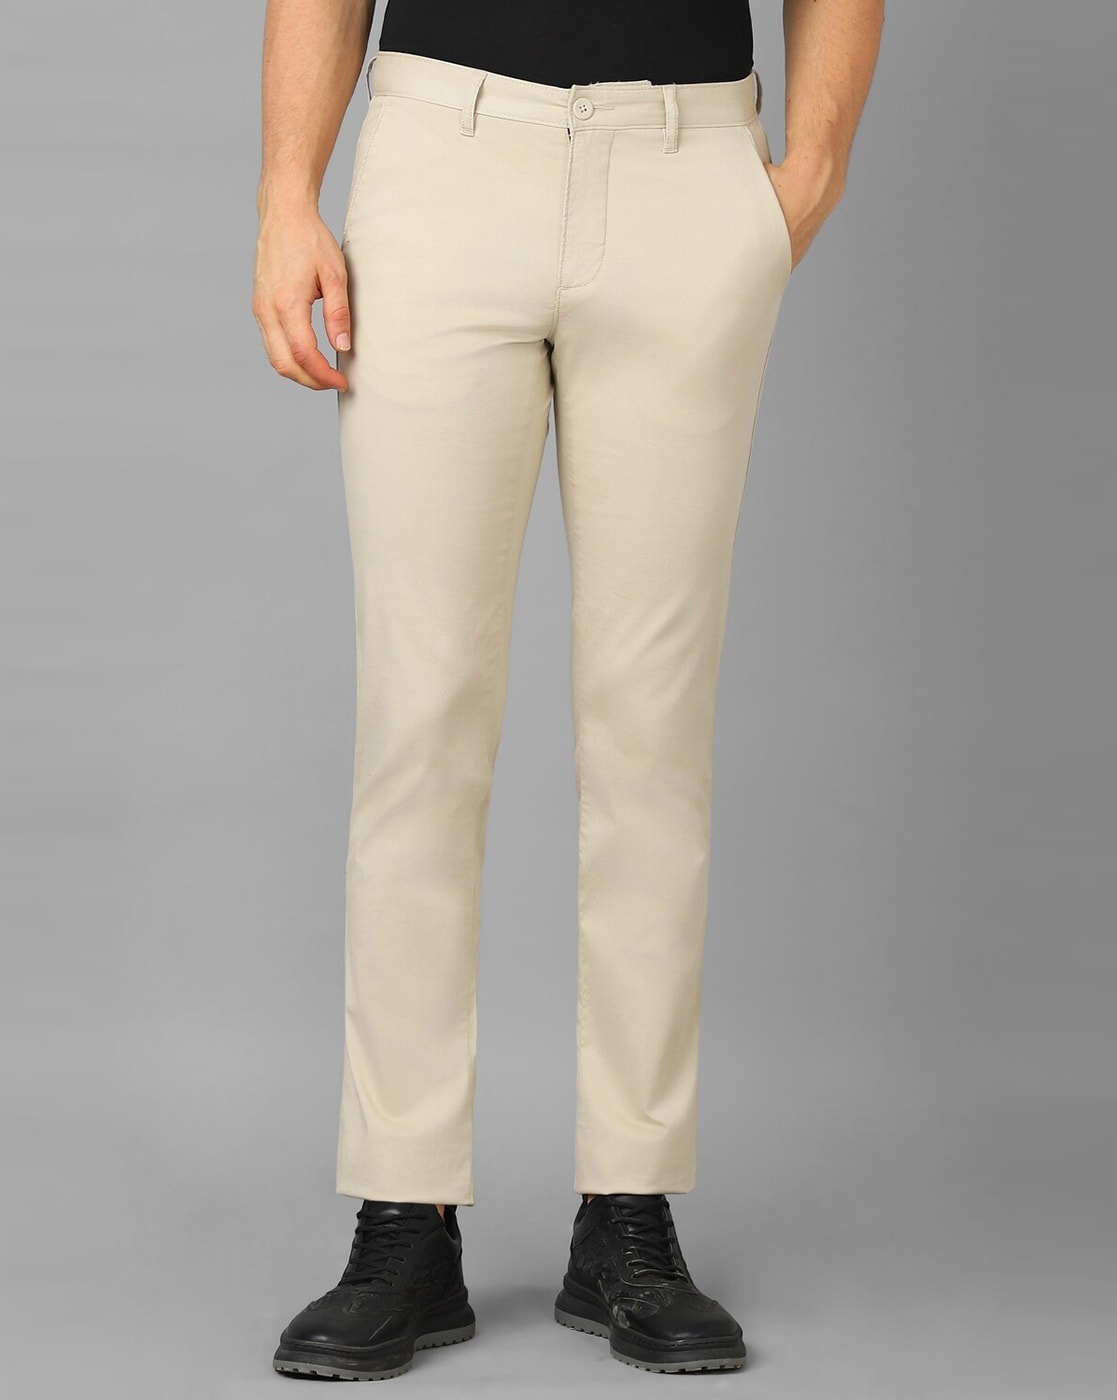 Louis Philippe Olive Trousers Buy Louis Philippe Olive Trousers Online at  Best Price in India  NykaaMan